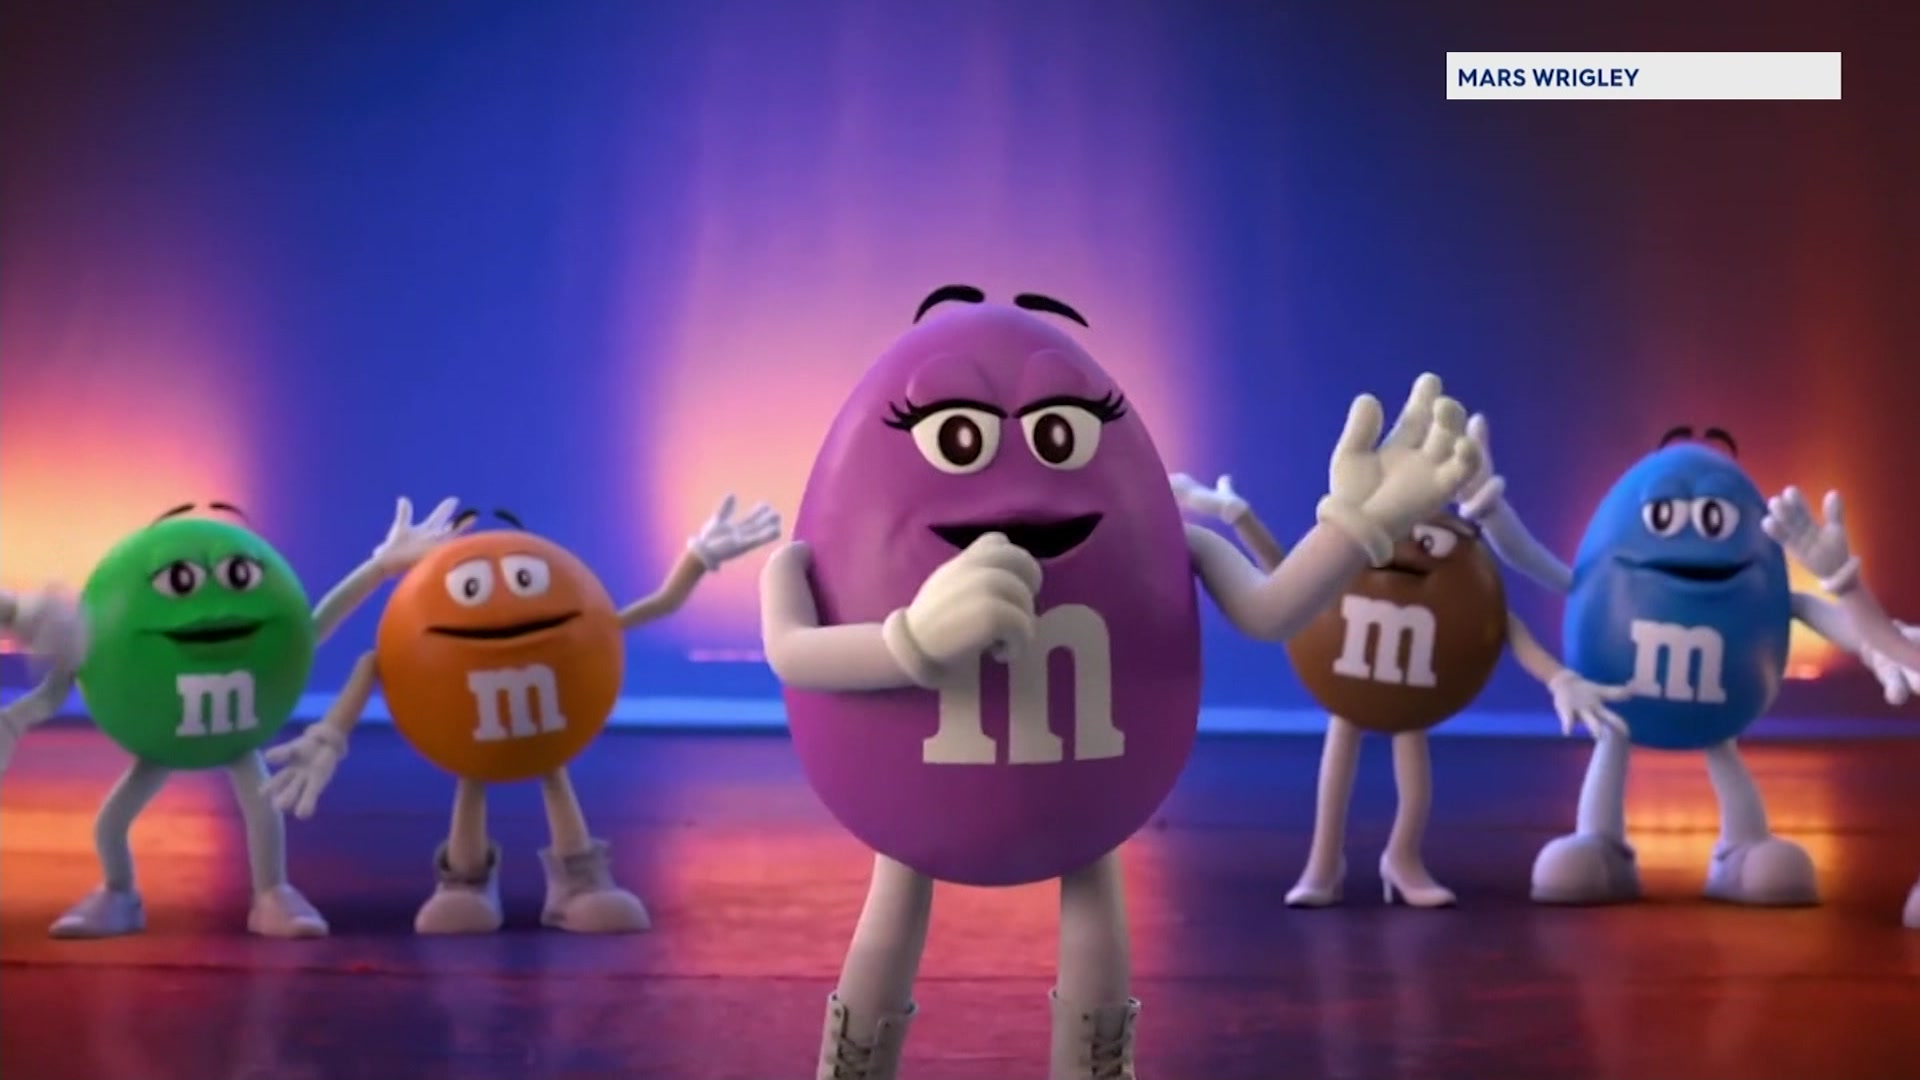 The M&M characters: what's going on there?